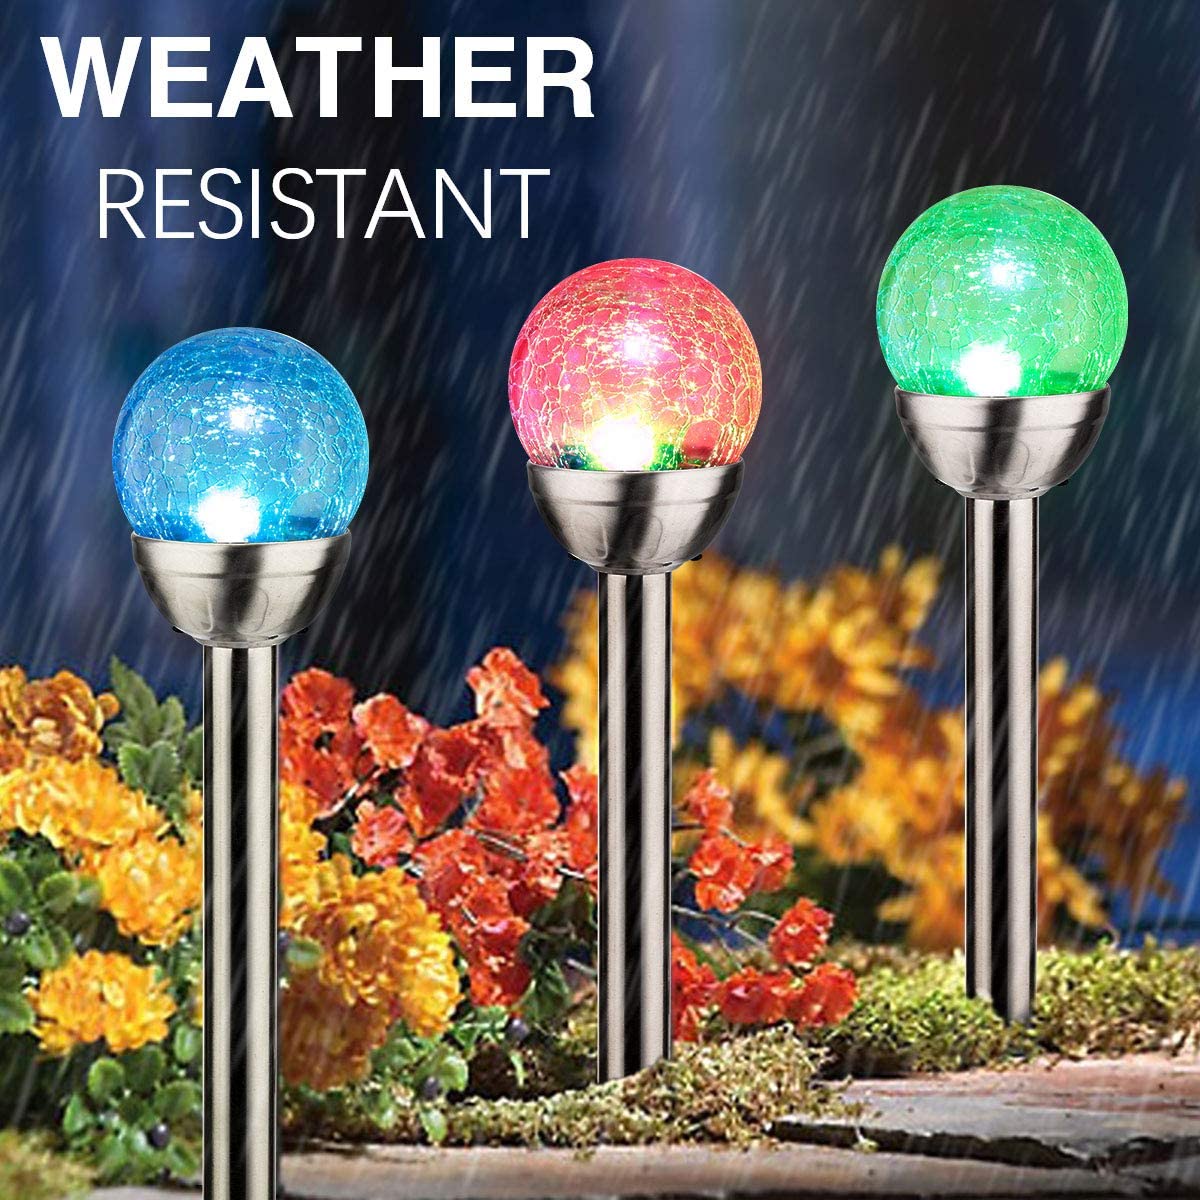 Solar Globe Lights Outdoor, Cracked Glass Ball Dual LED Garden Lights,Color-Changing  Outdoor Landscape Garden Light Decoration, Garden Decor Pcs